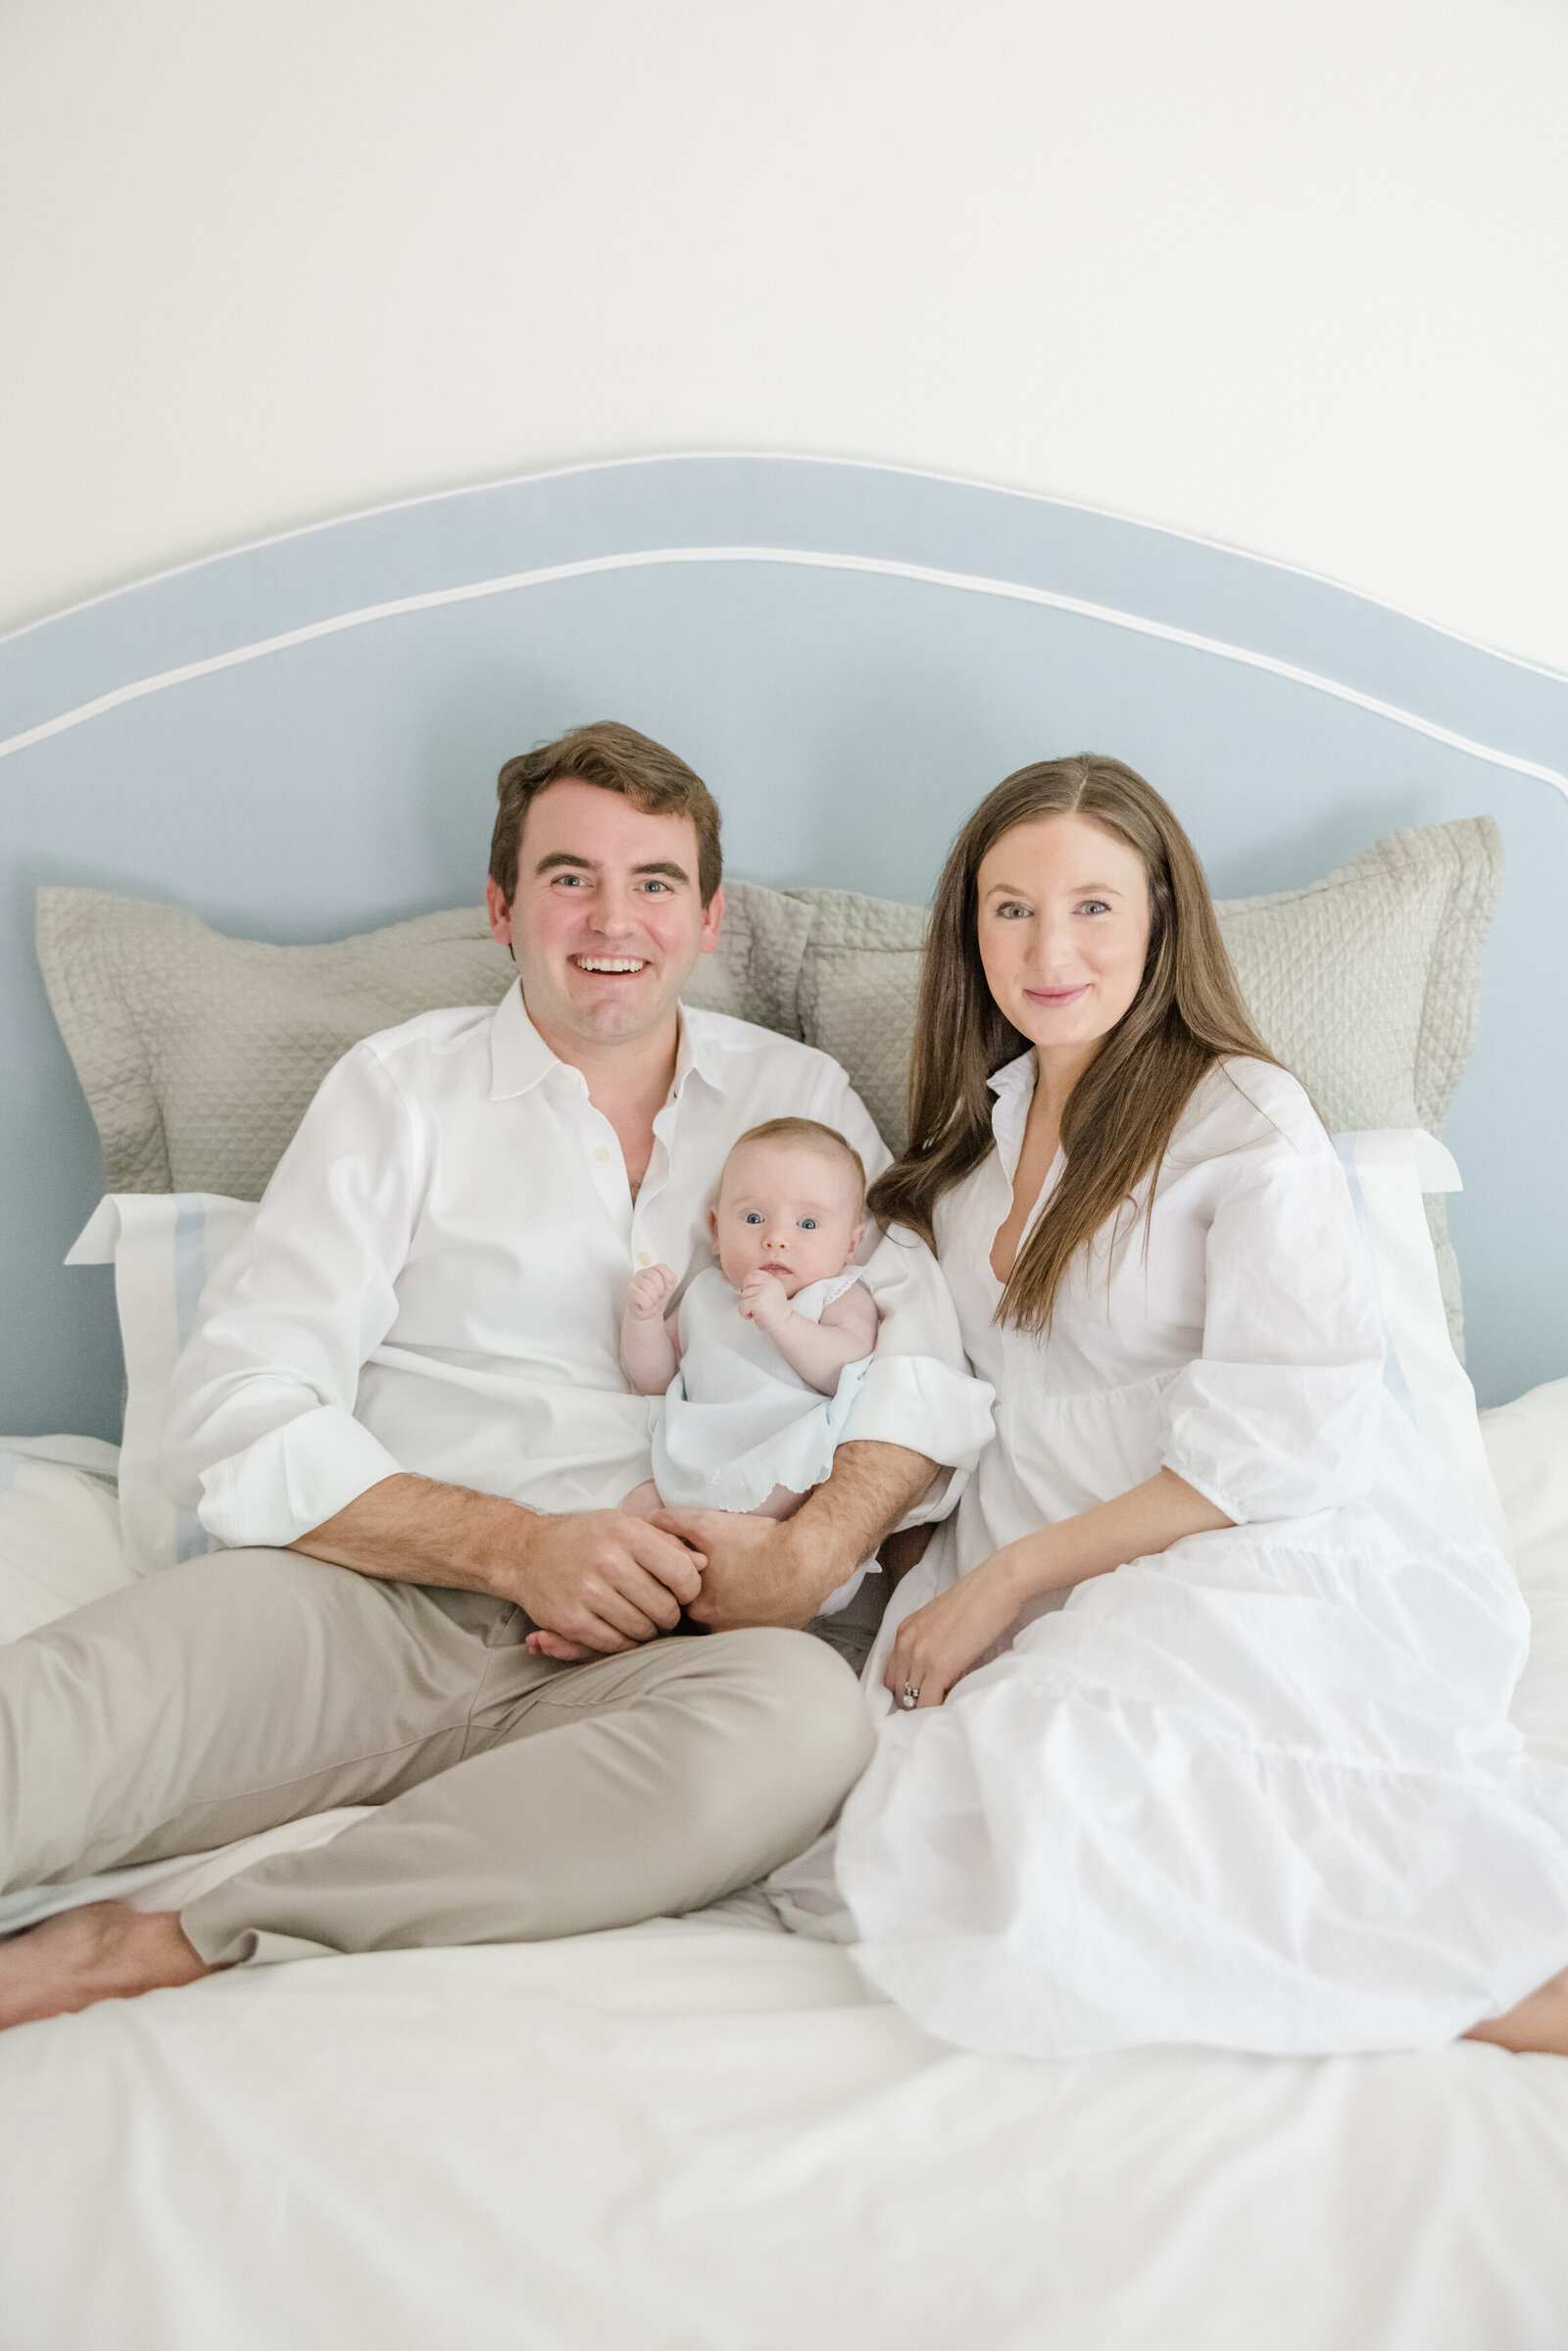 Parents seated in front of a blue headboard holding their baby.